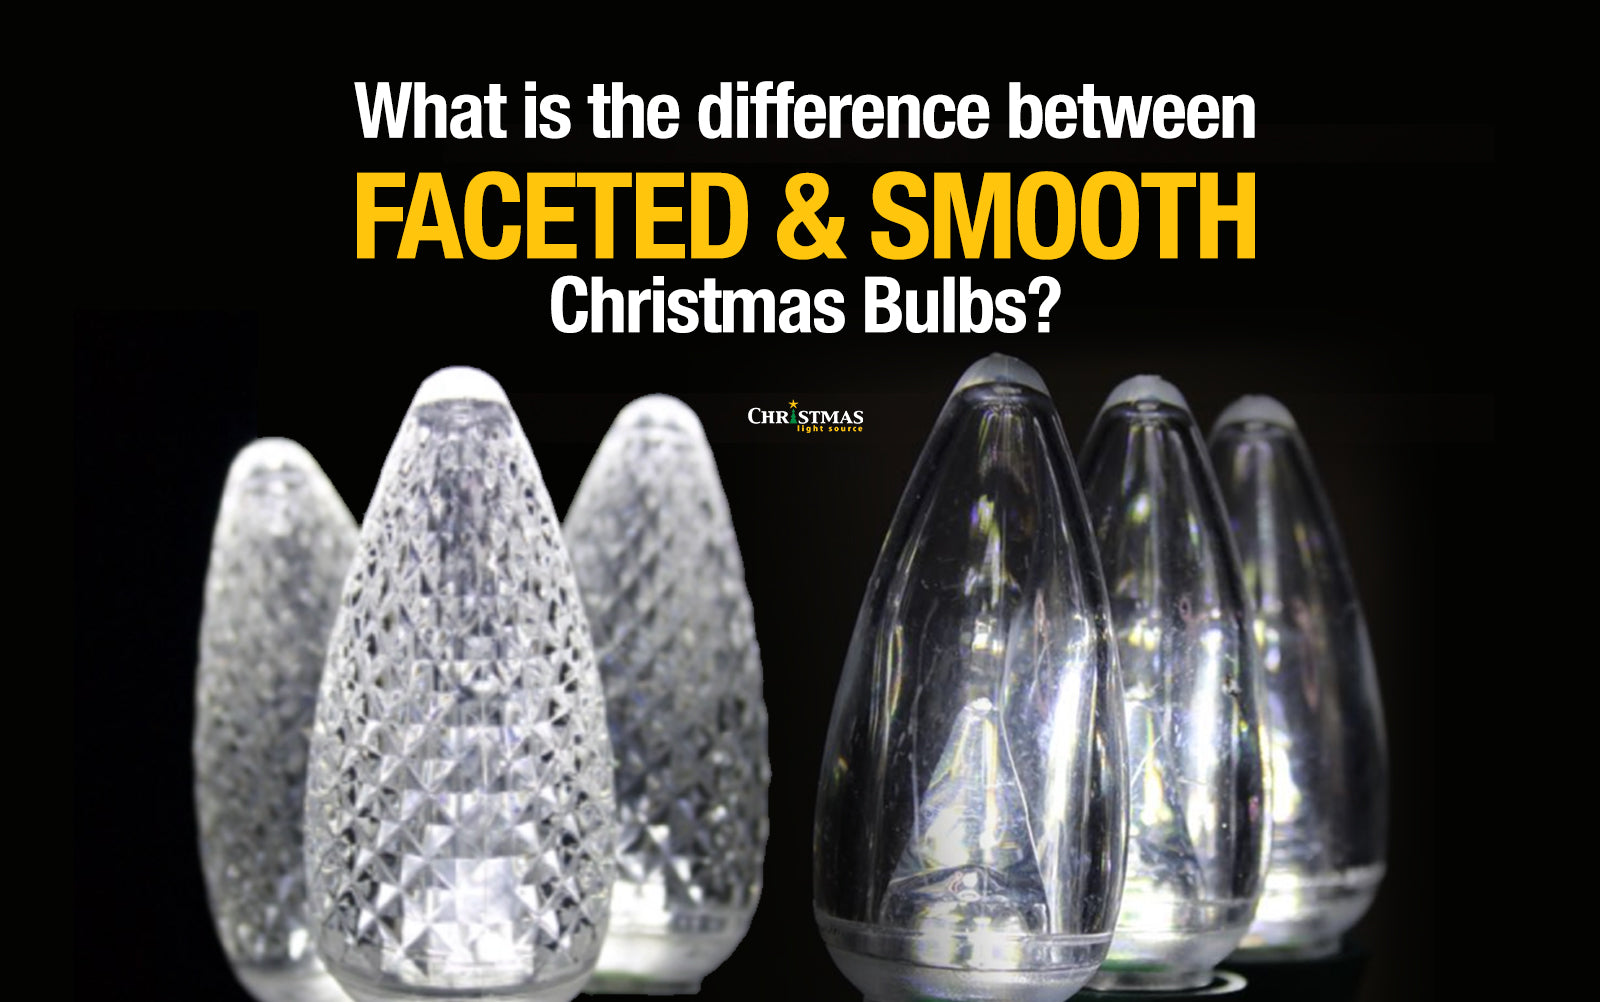 What is the difference between faceted and smooth bulbs